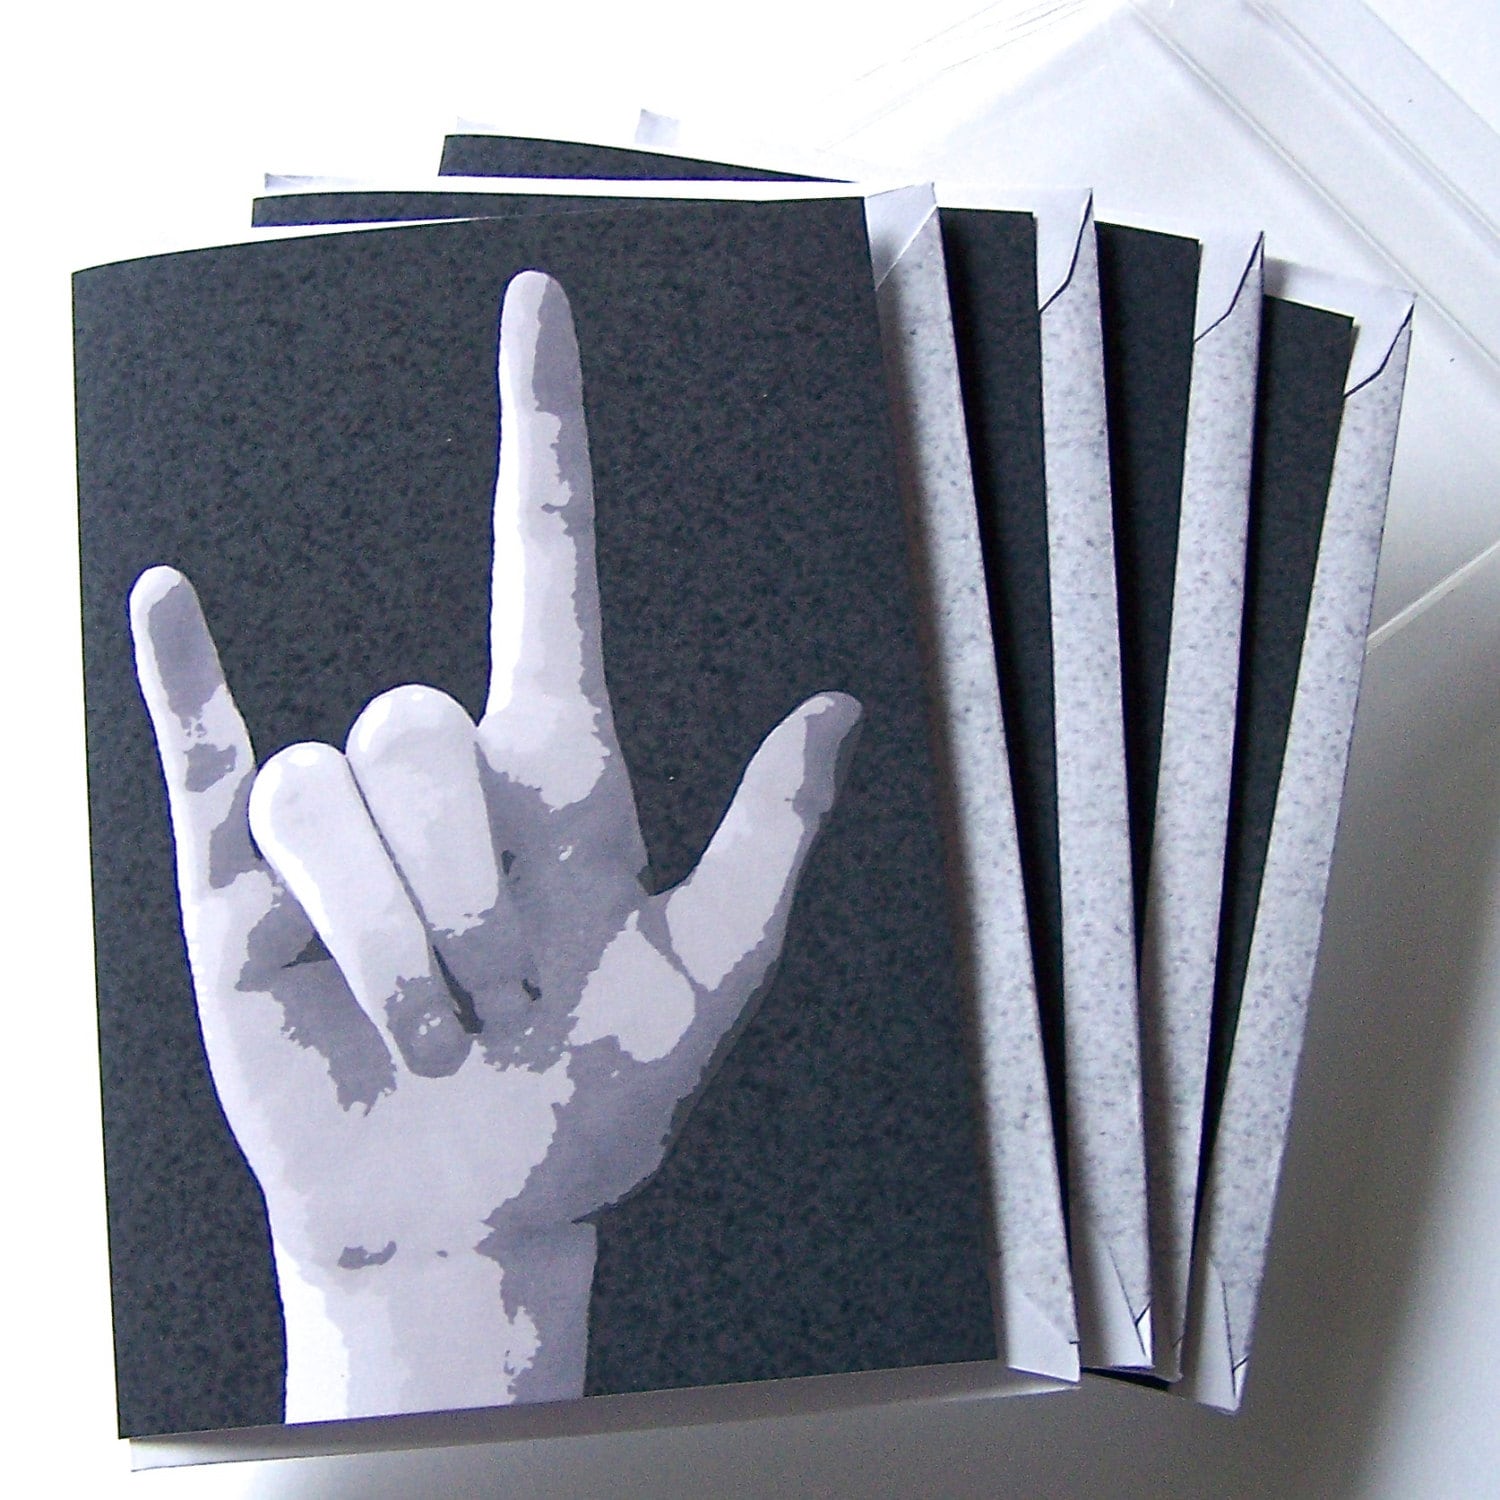 Asl I Love You American Sign Language Blank Notecards In Boxed Set Choose Assortment Or Same Design